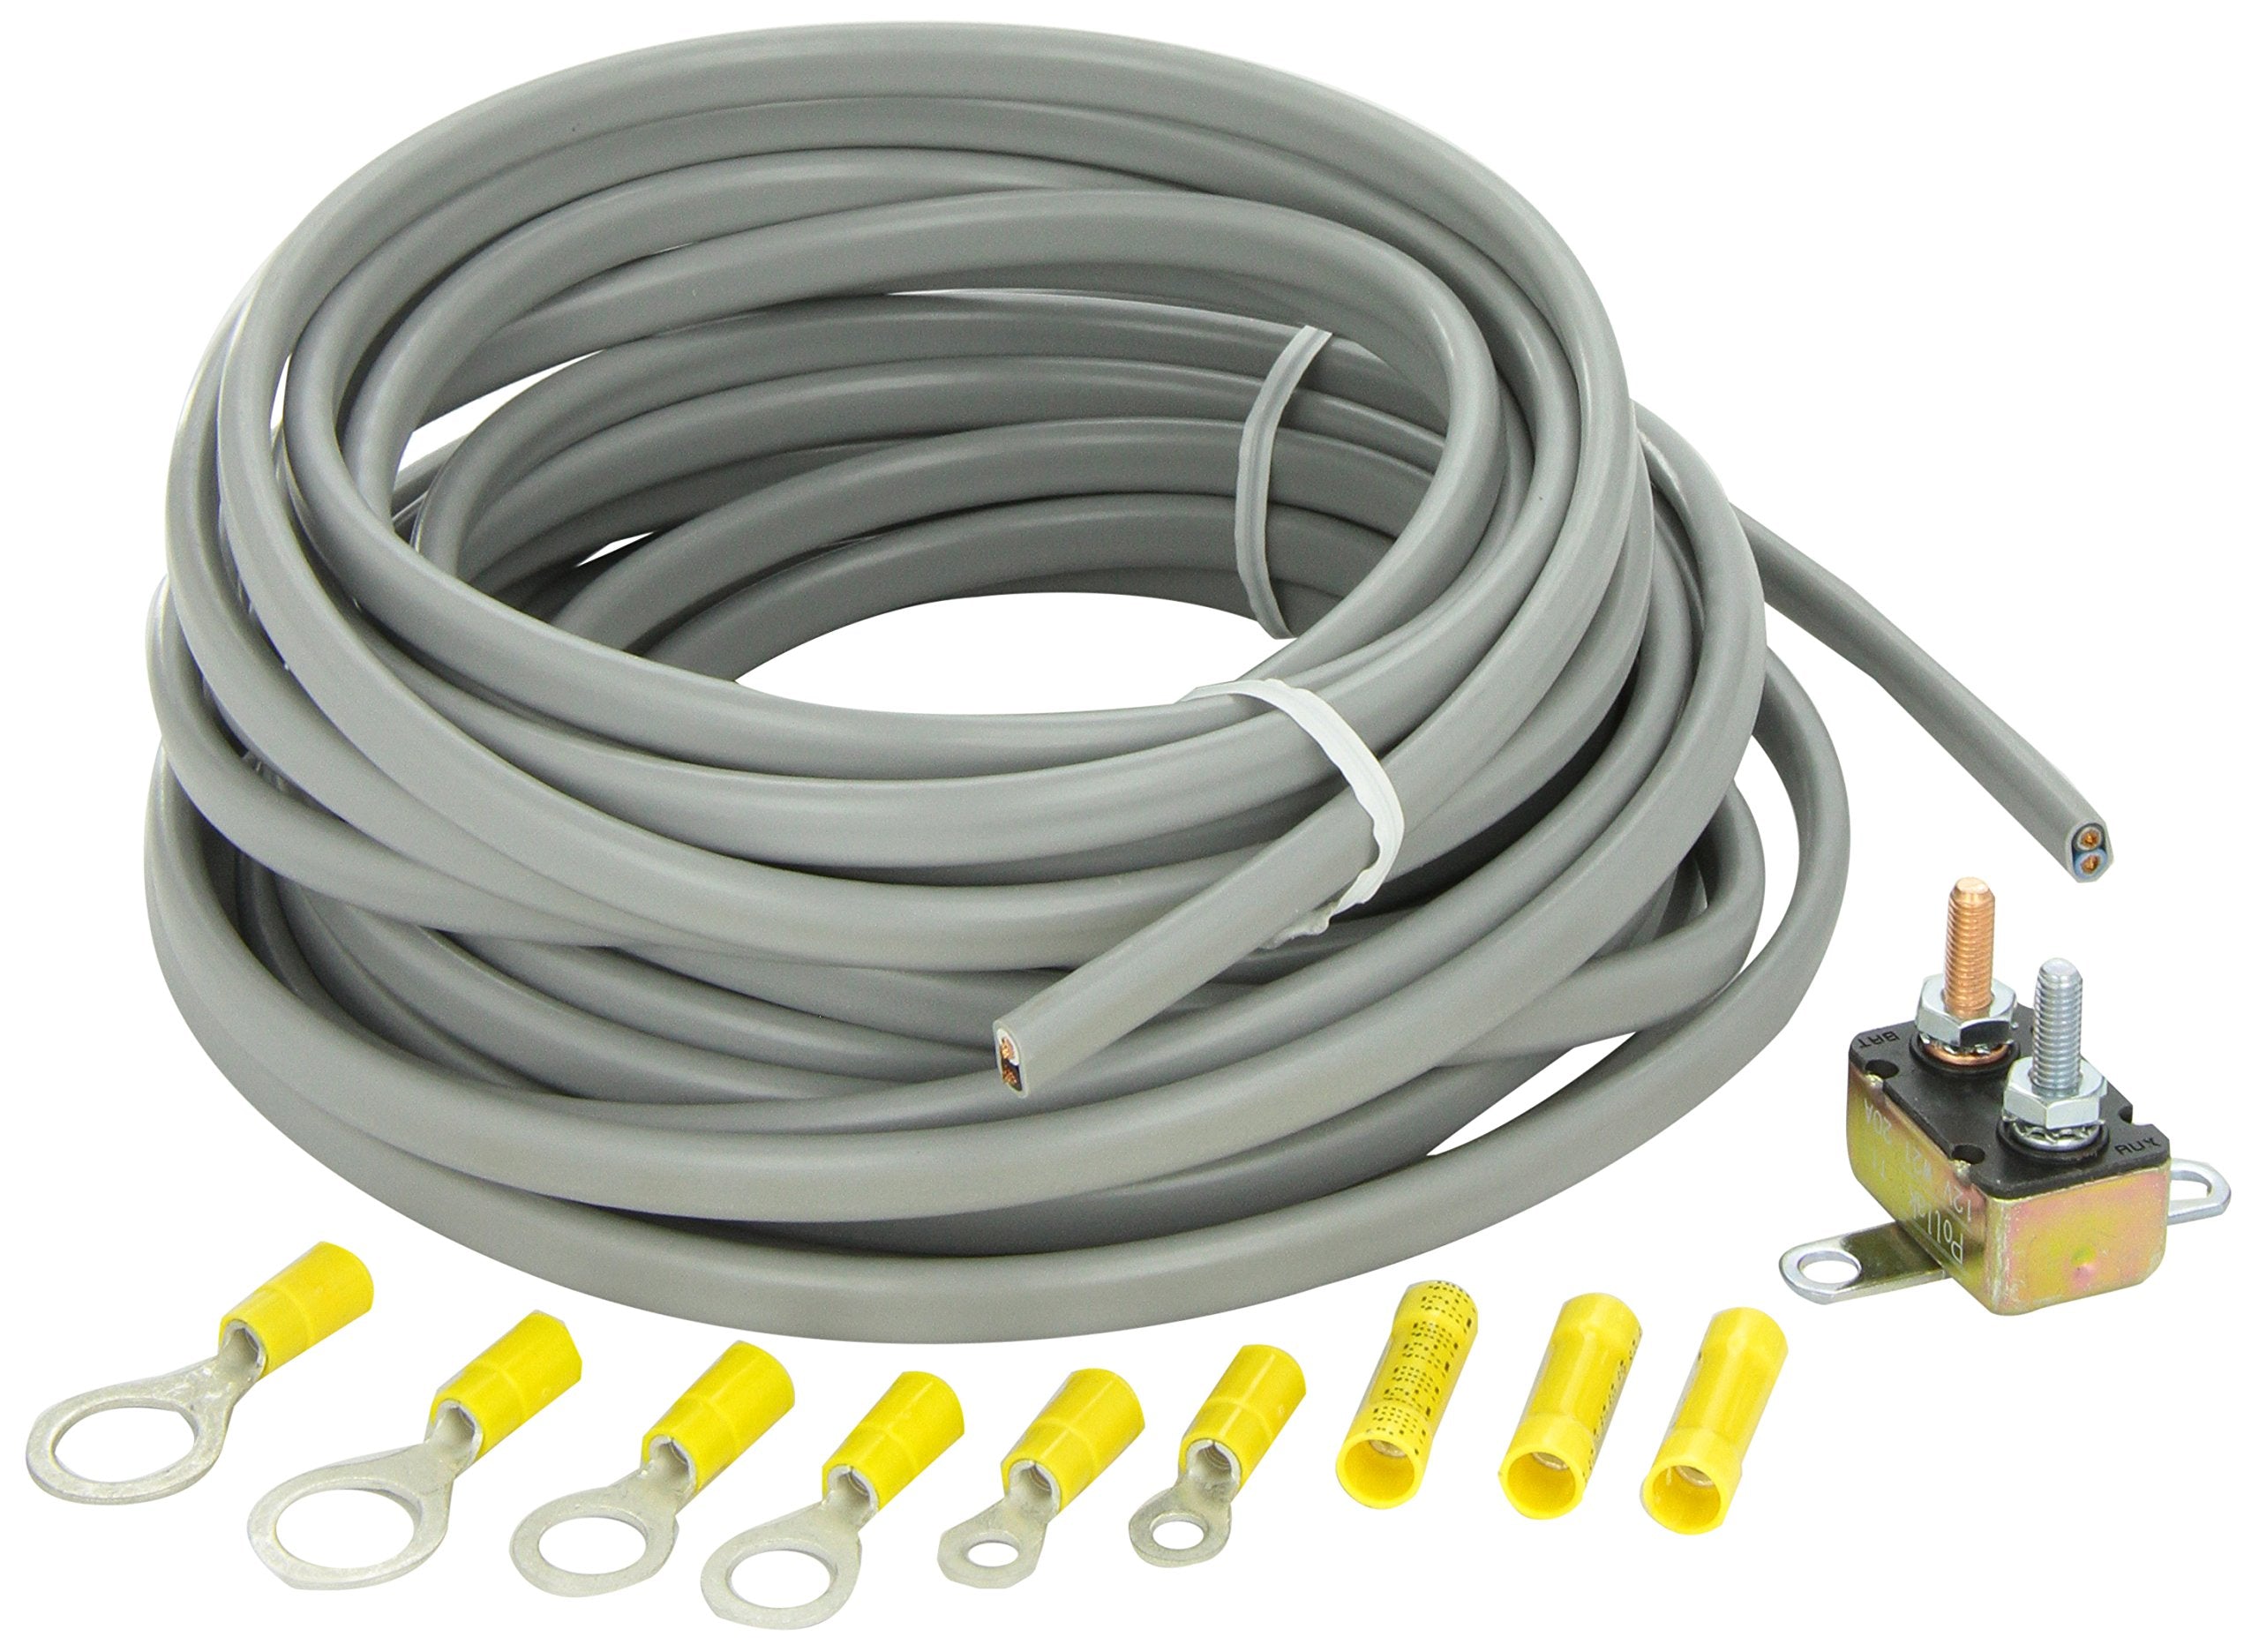 Tow Ready 20505 Wiring Kit for 2 to 4 Brake Control System